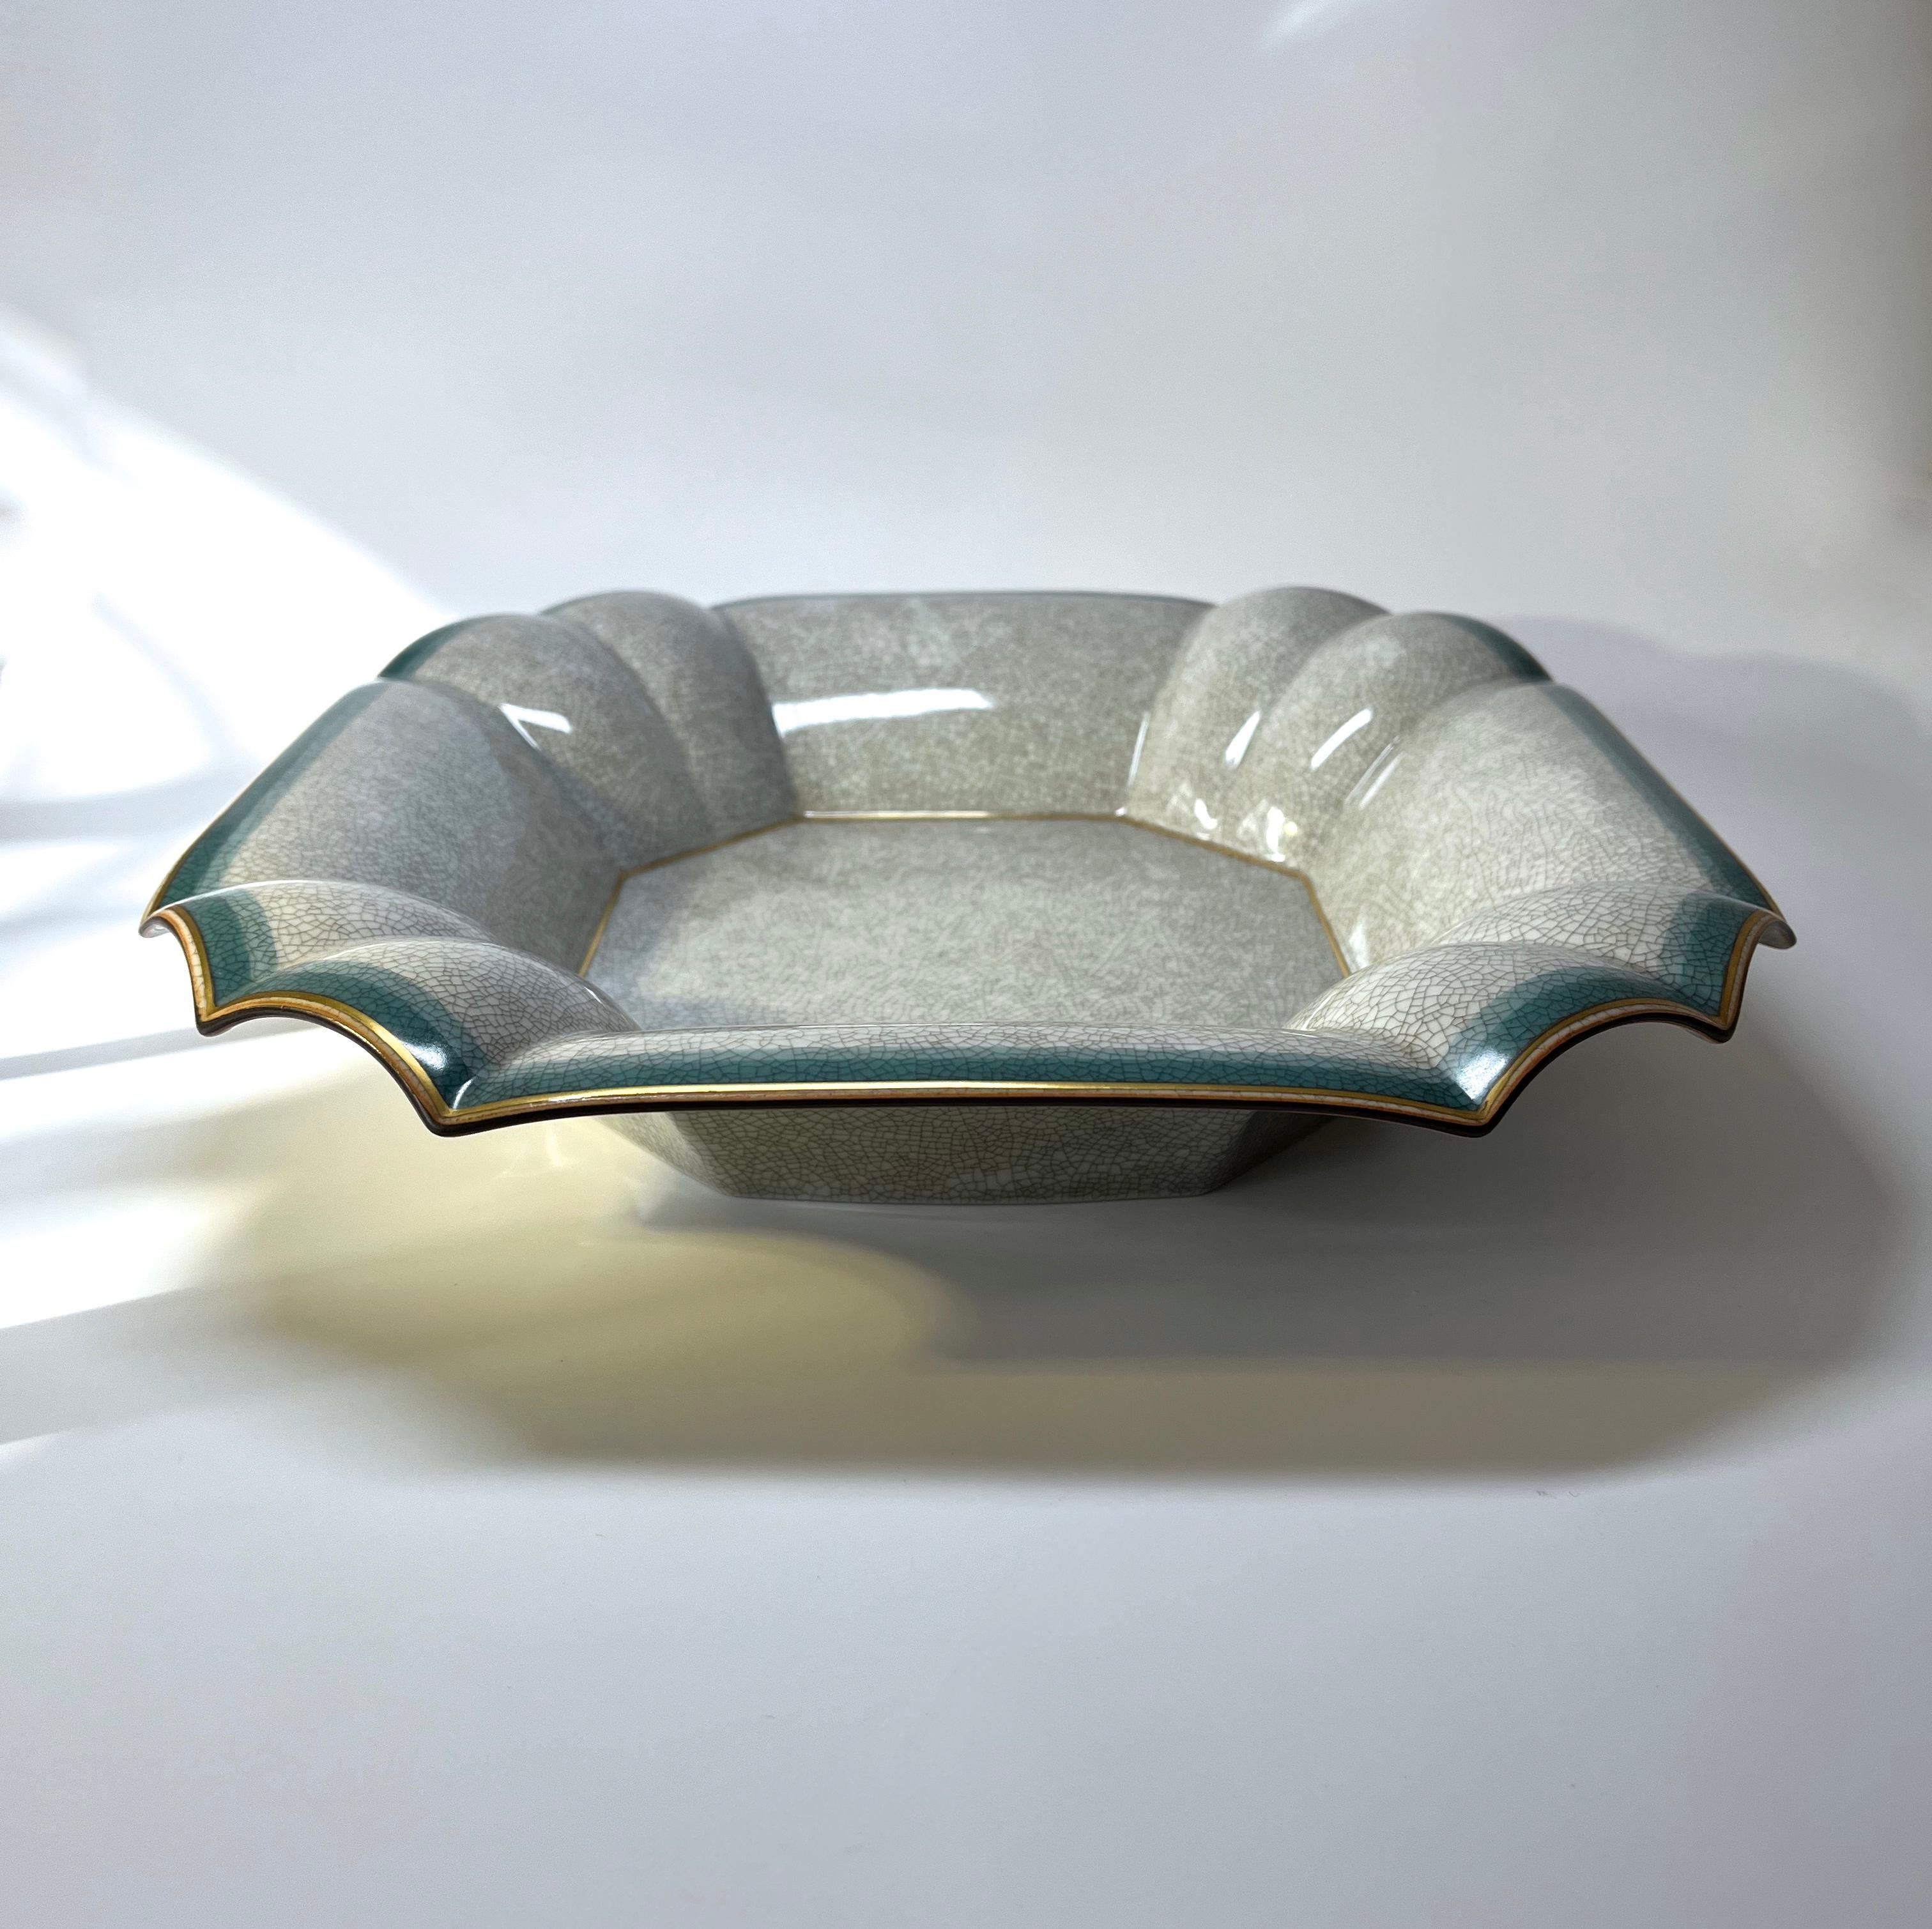 20th Century Thorkild Olsen Beautiful Tones Of Teal & Grey, Crackle Glazed Dual Purpose Bowl  For Sale